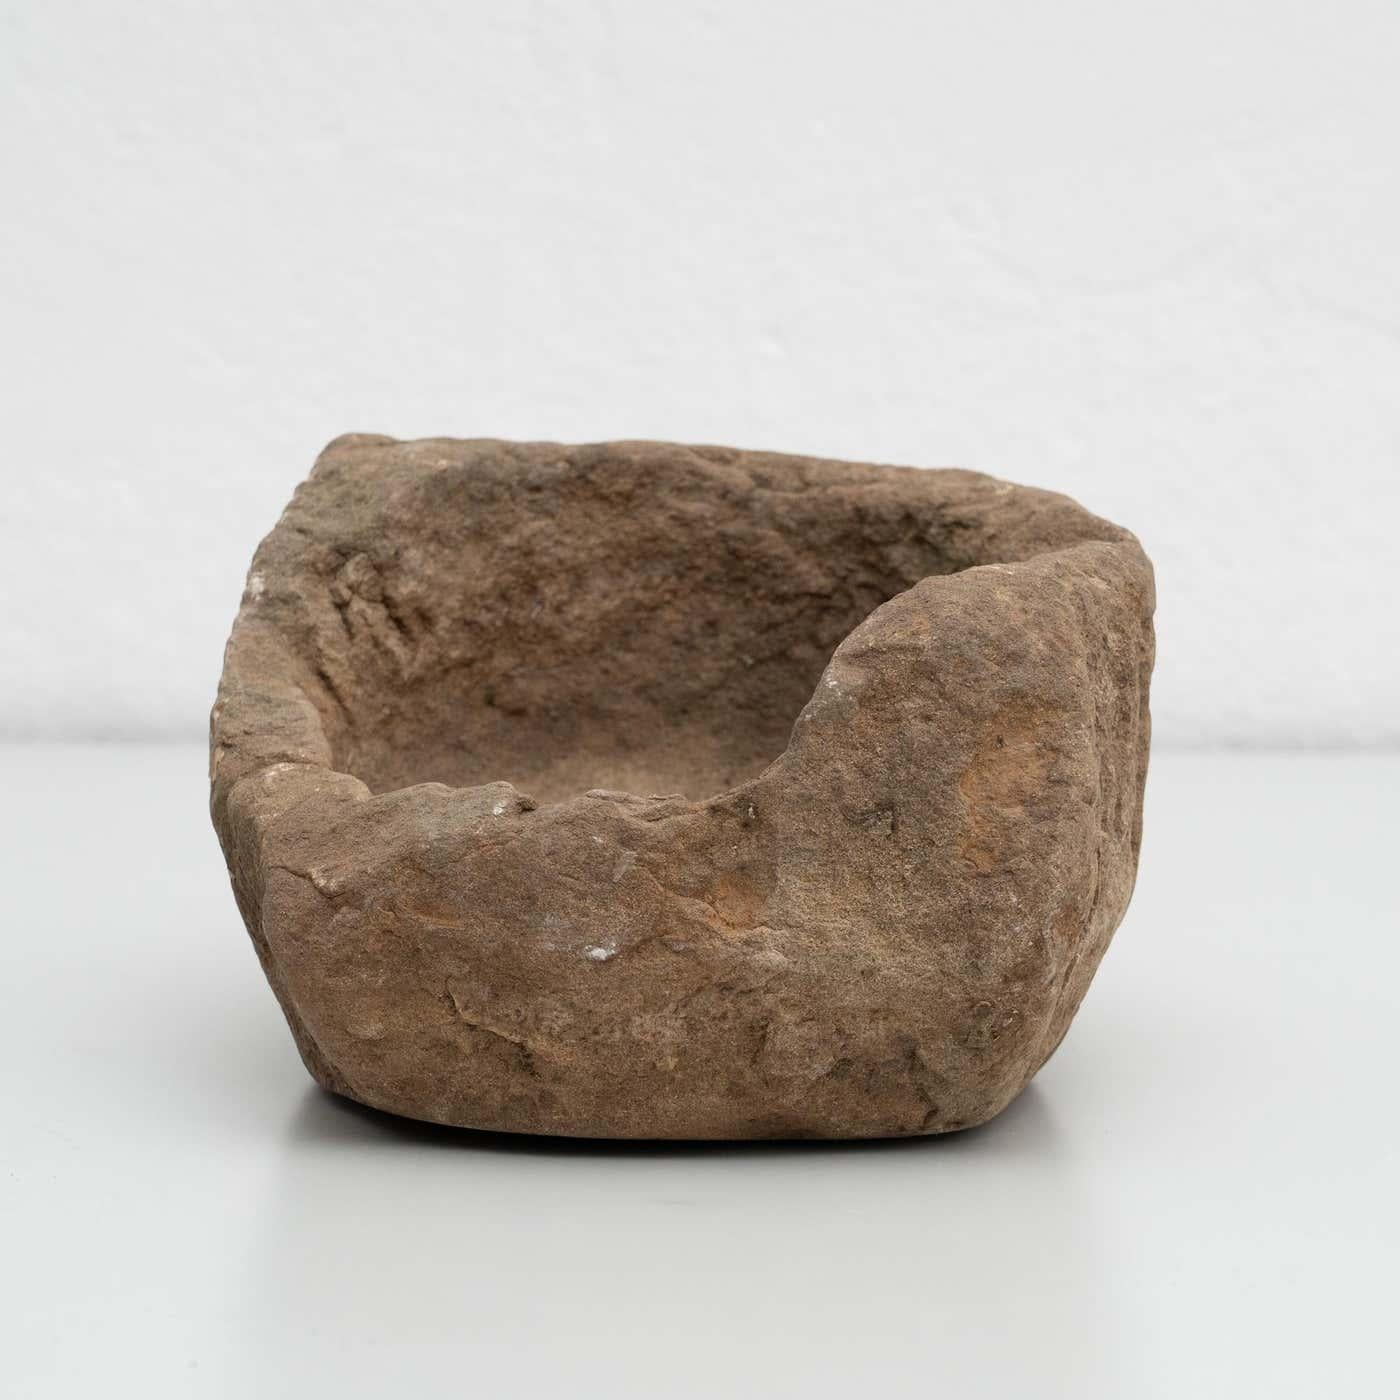 Antique vintage stone mortar. 

Made by unknown manufacturer in Spain circa 1950.

In original condition, with minor wear consistent with age and use, preserving a beautiful patina.

Materials:
Stone.
 